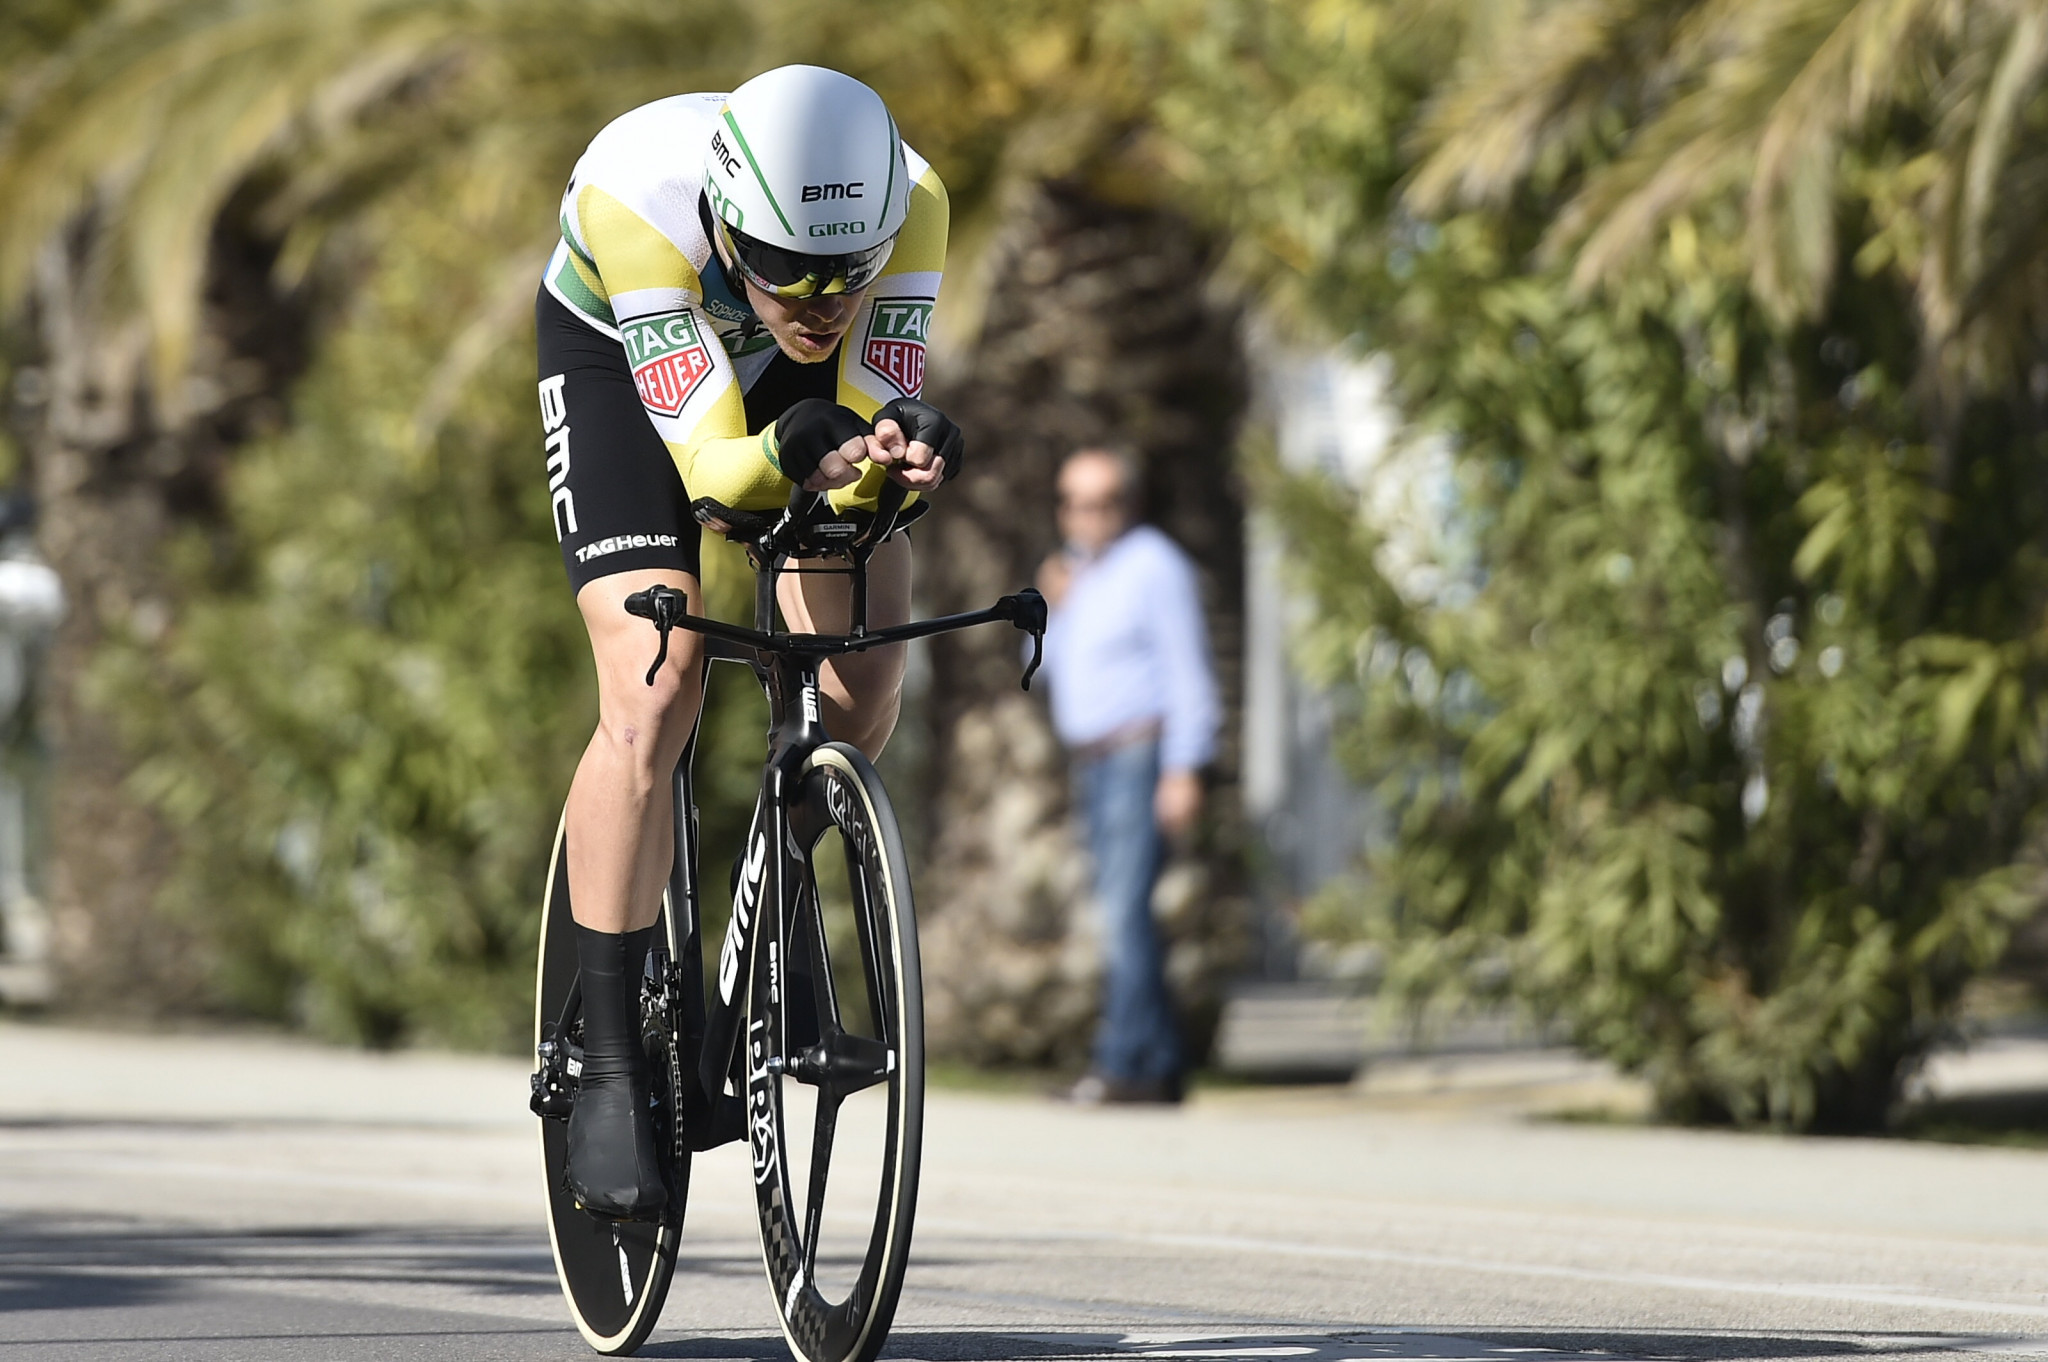 Australia's Rohan Dennis won the individual time trial by three seconds ©LaPresse